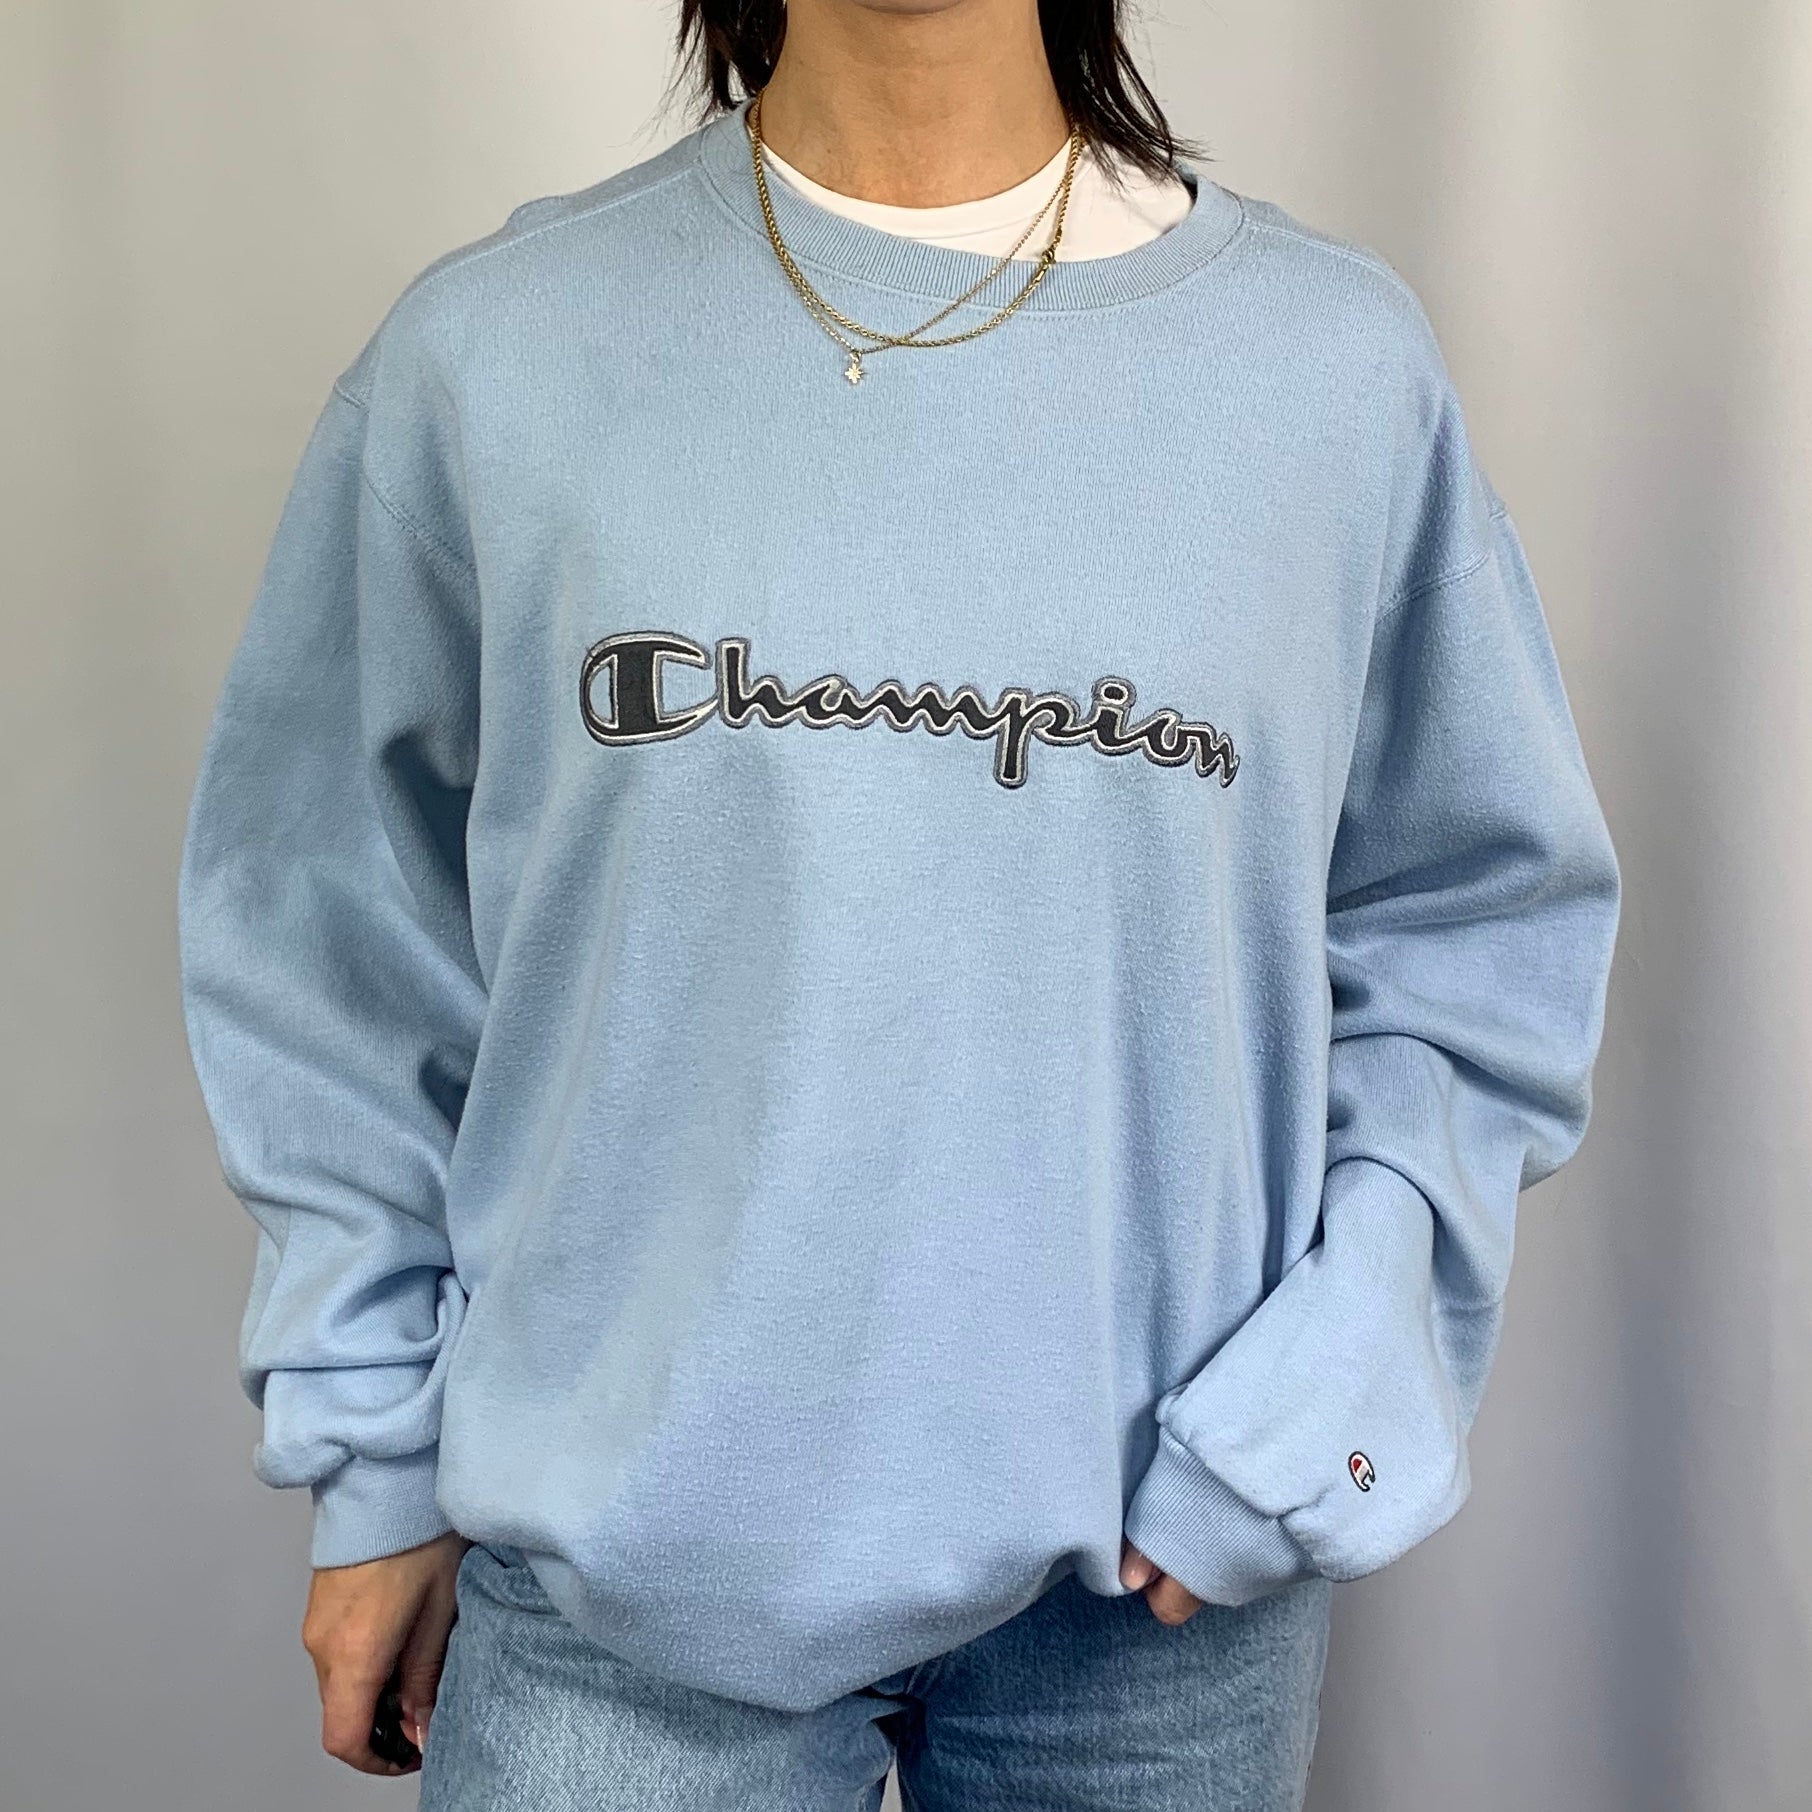 VINTAGE CHAMPION SWEATSHIRT WITH BIG EMBROIDERED SPELLOUT - WOMEN'S XL/ MEN'S M